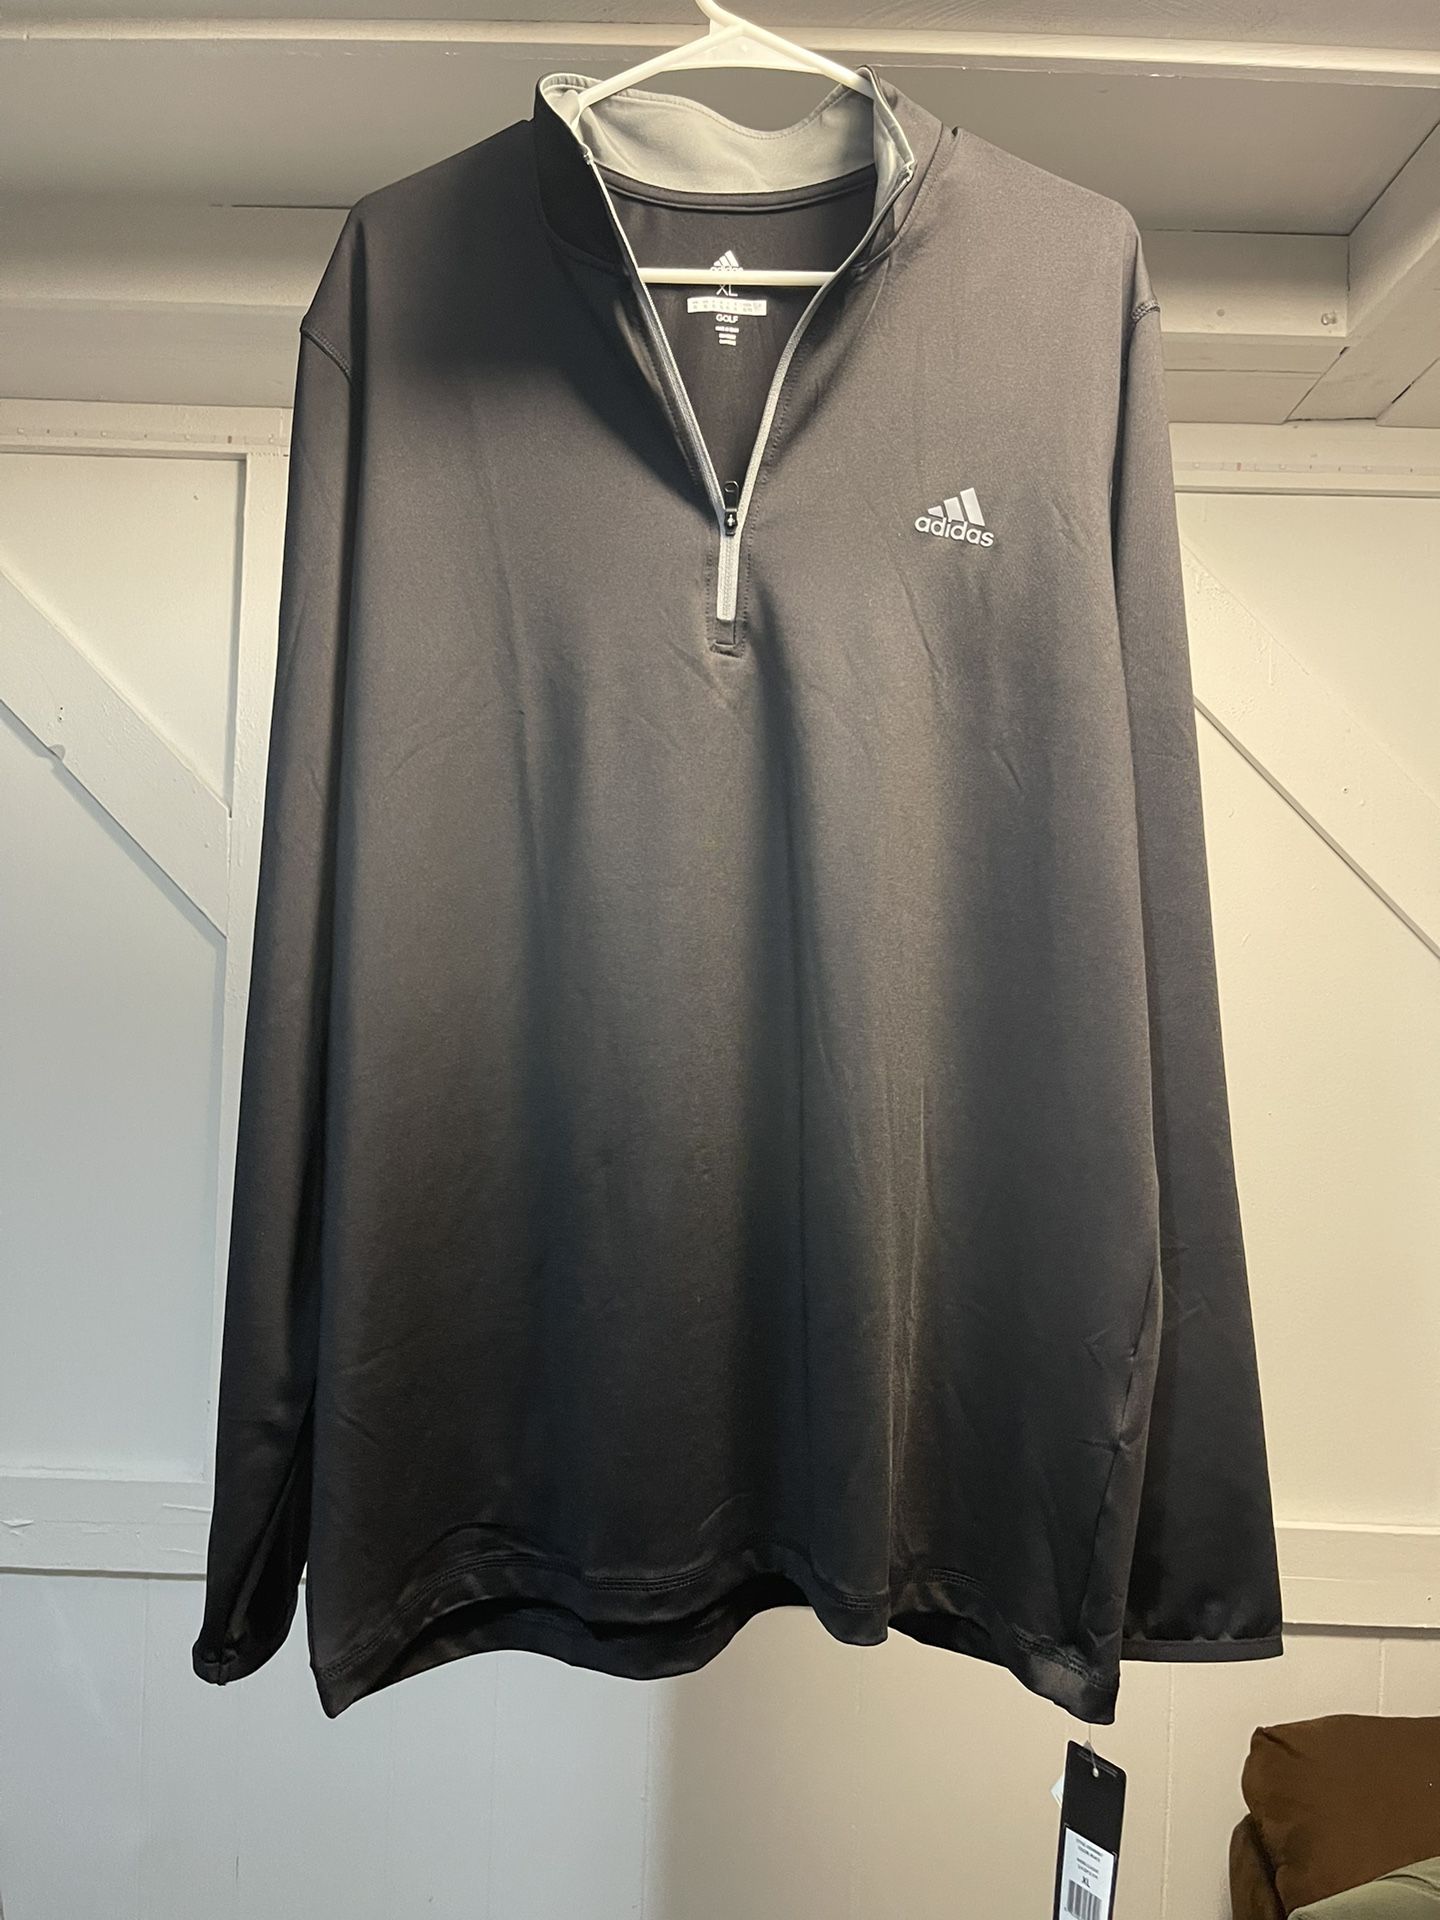 Adidas Men’s XL Apparel New With Tags 